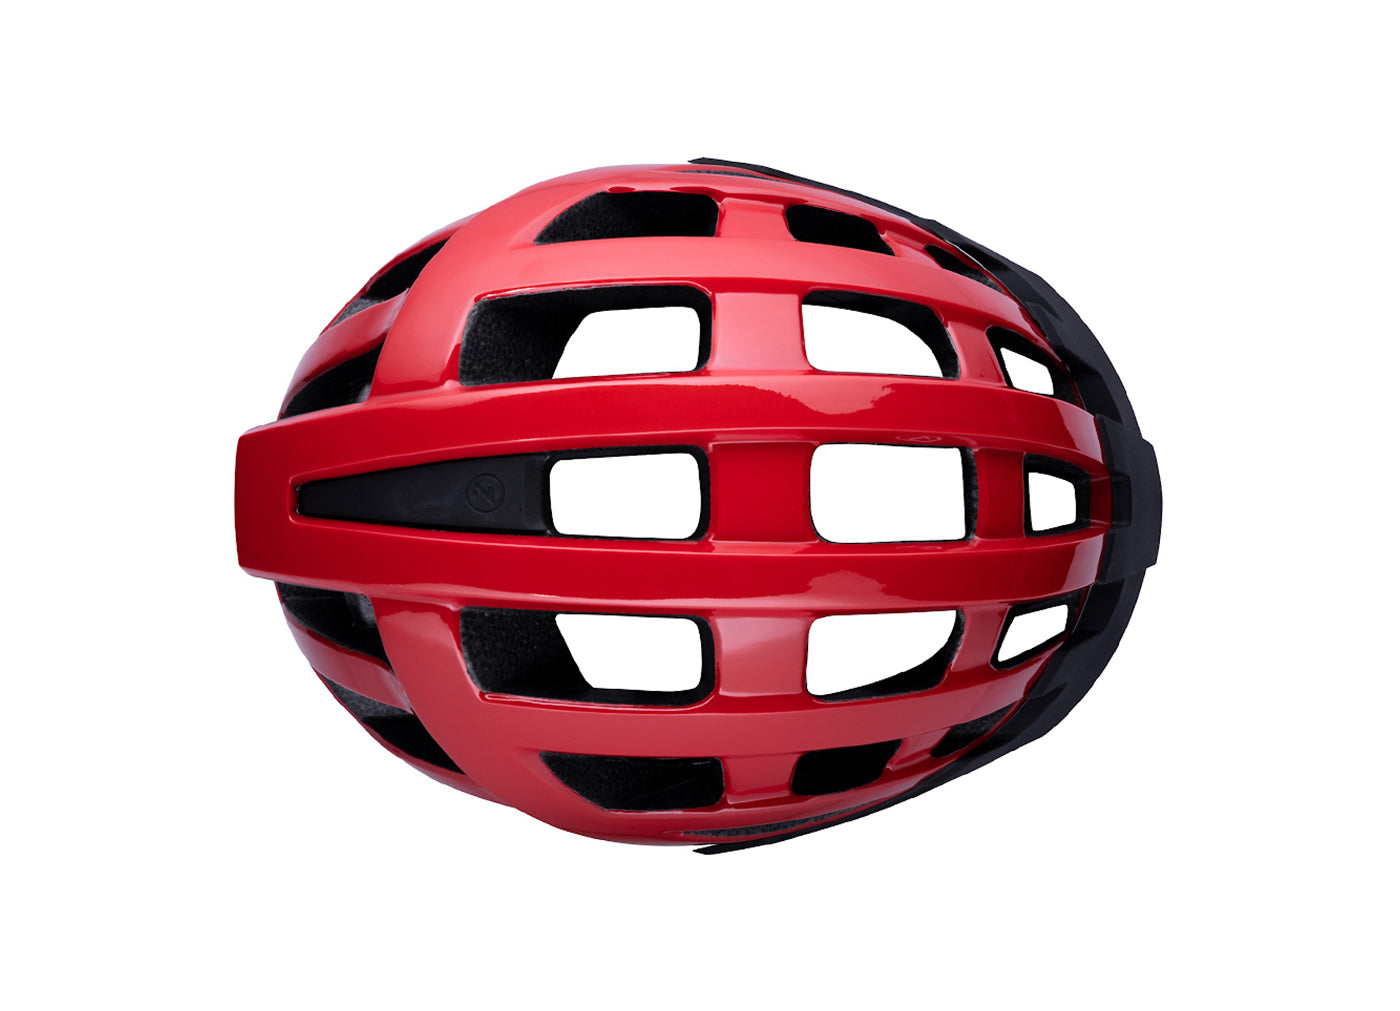 Lazer Helmet Compact Asian Fit - Cyclop.in